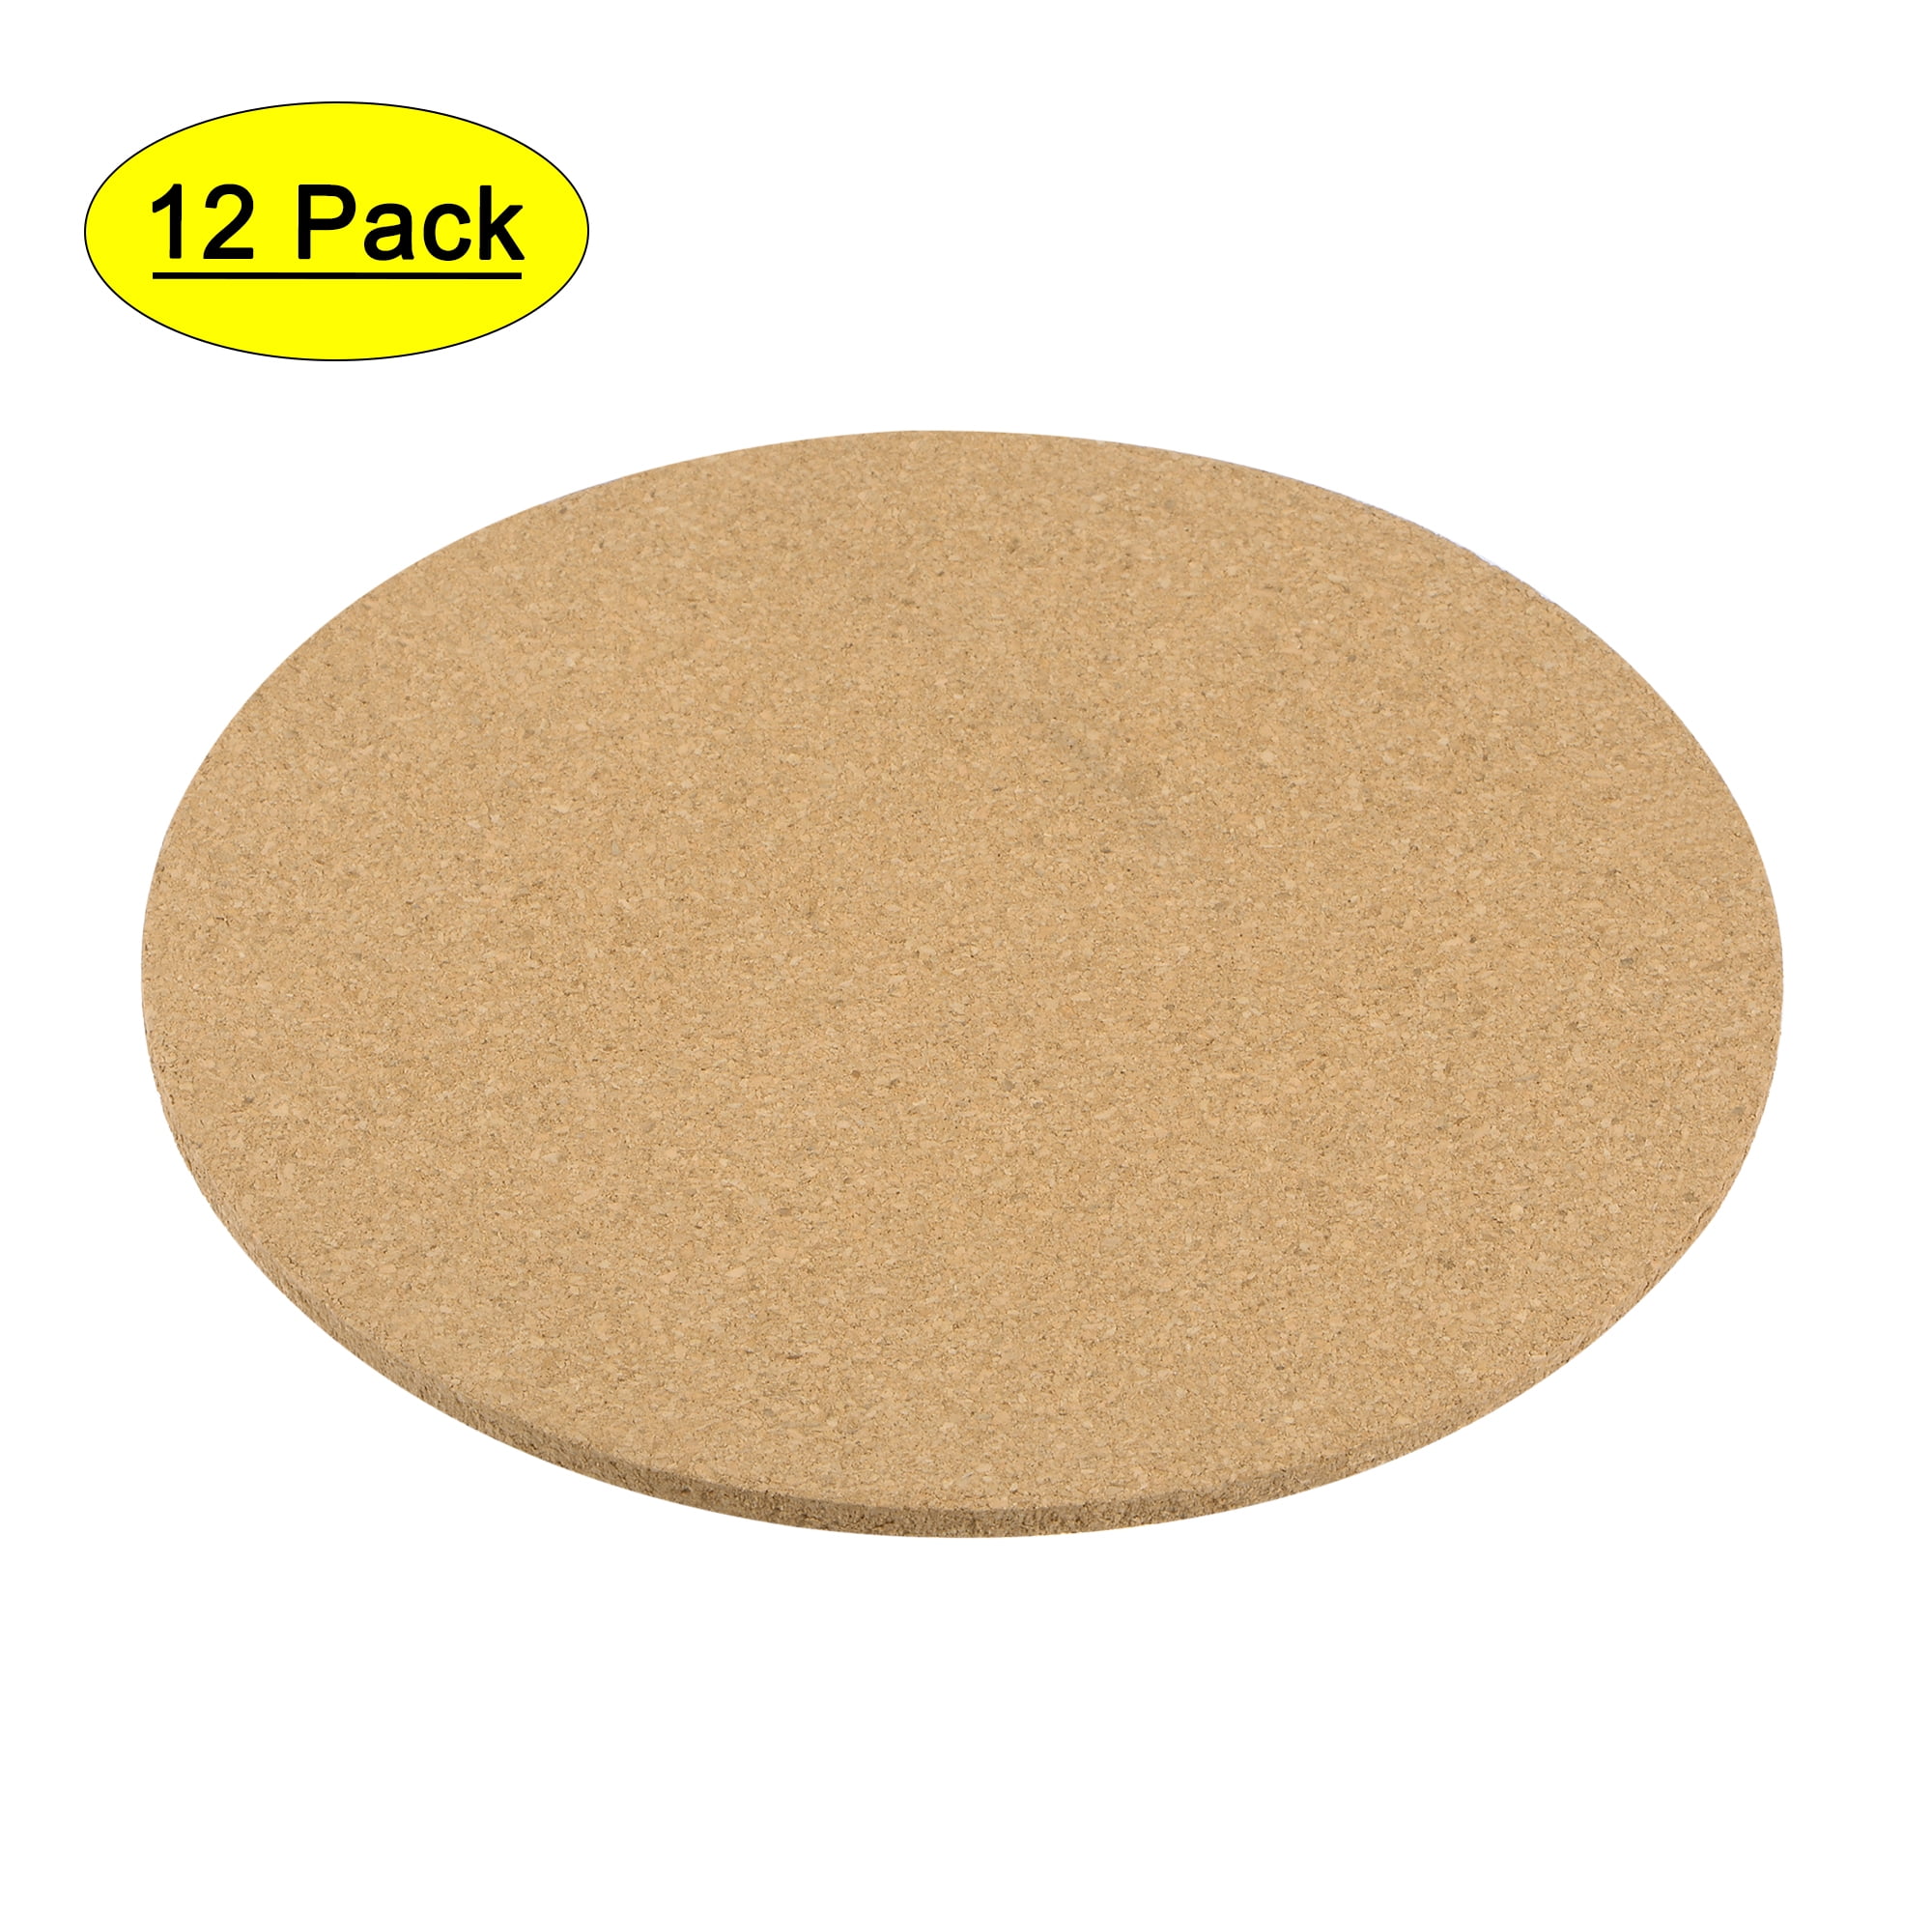 5 Pcs Cork Coaster For Beverage Coasters, Heat-Resistant Water